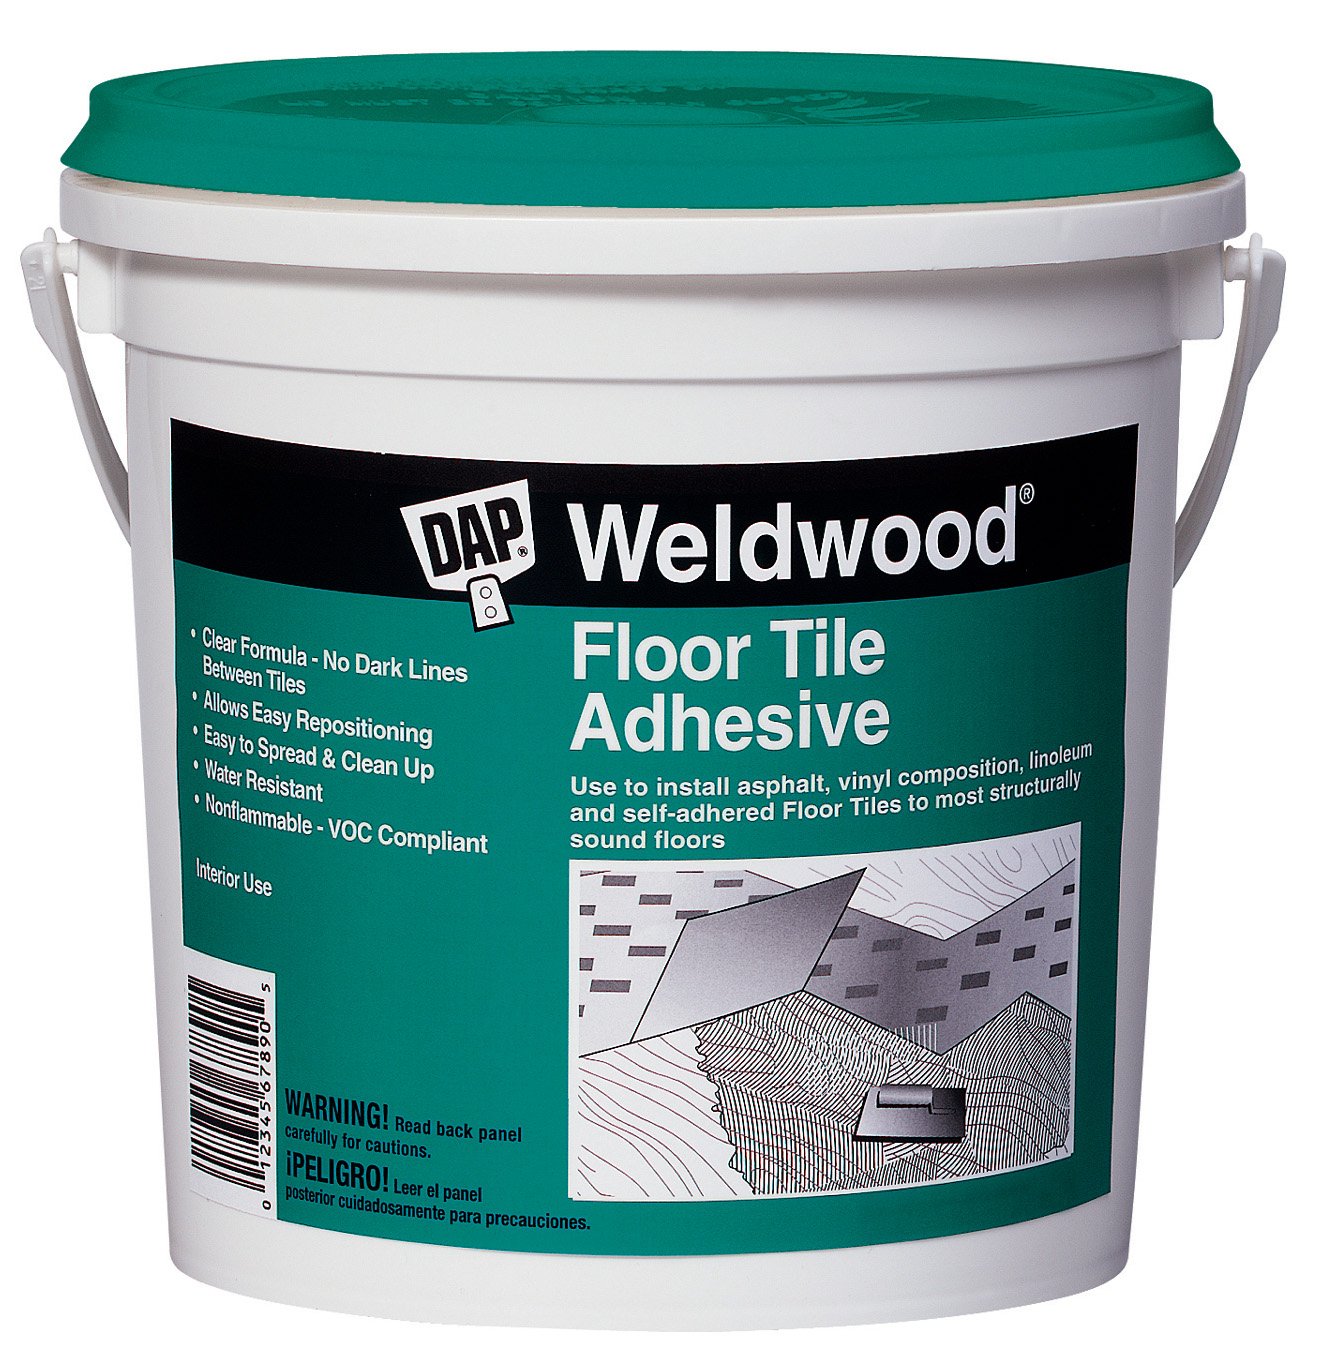 What Adhesive To Use For Tile